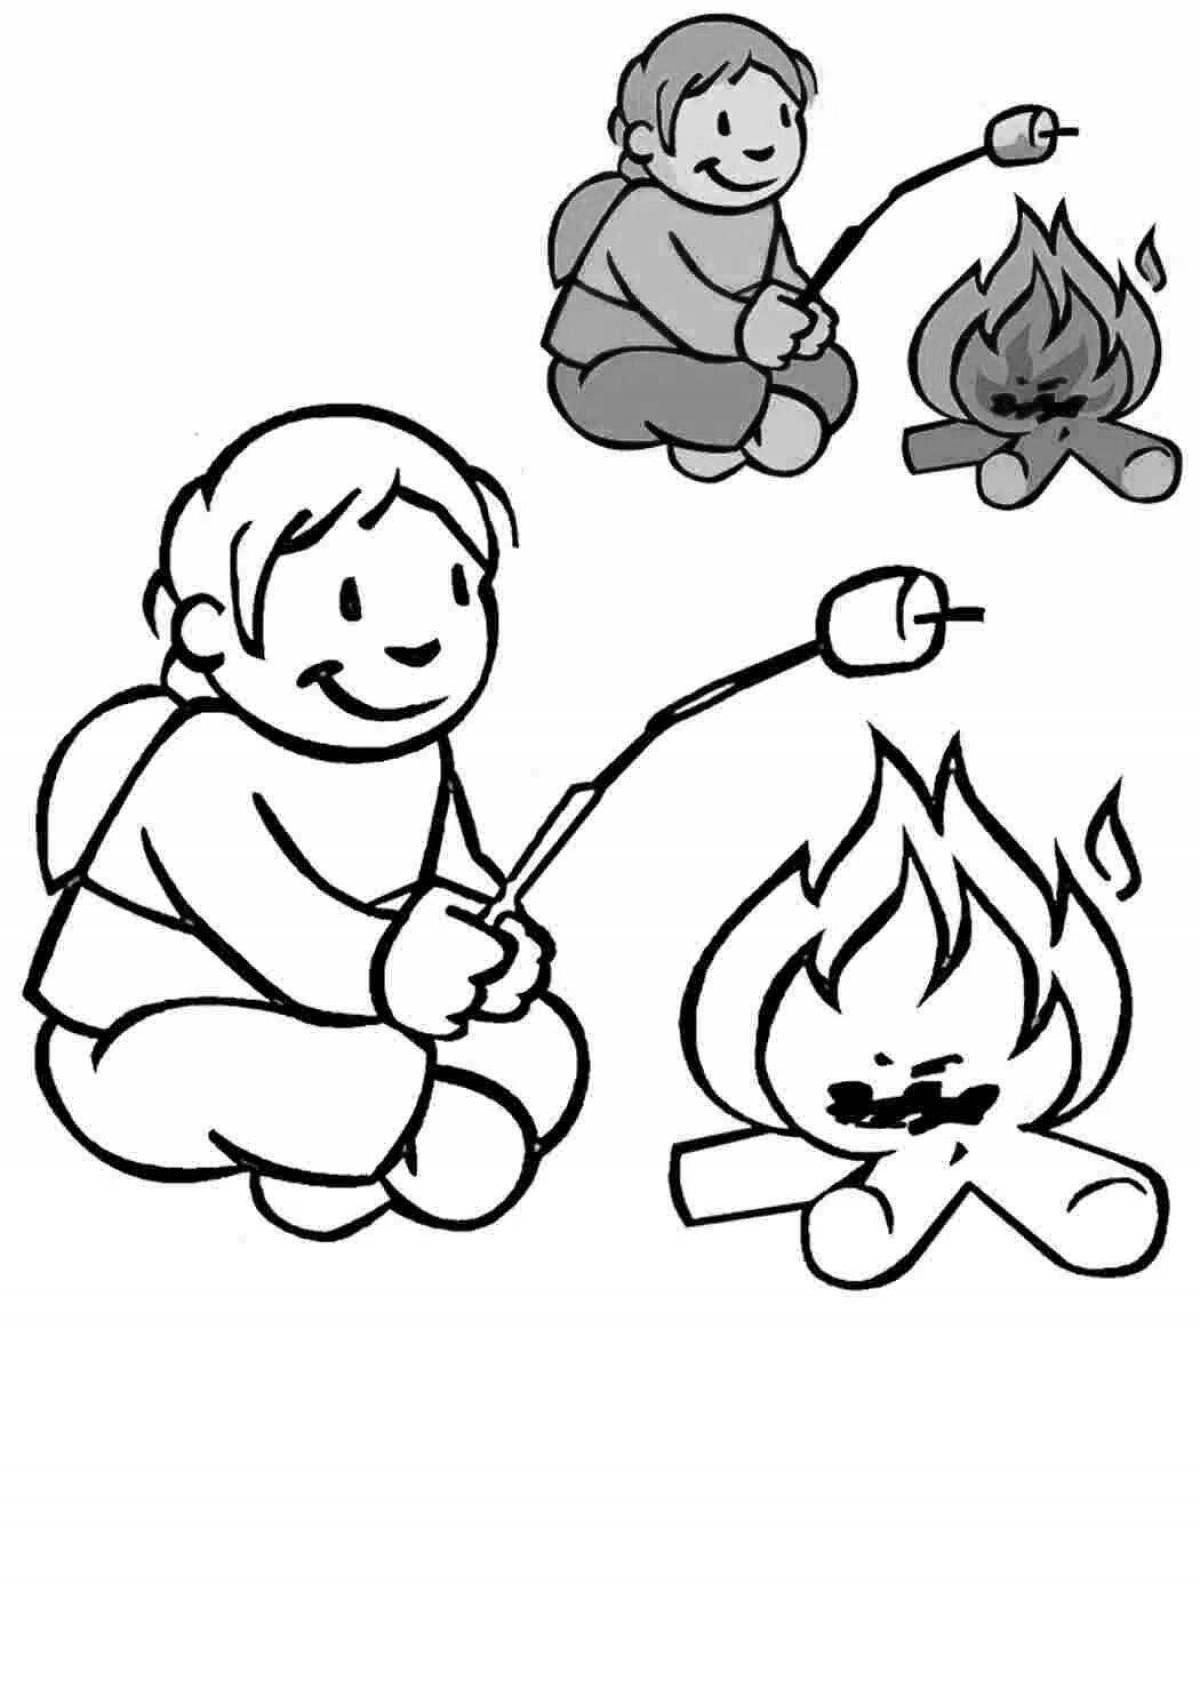 Intense Fire Enemy coloring page